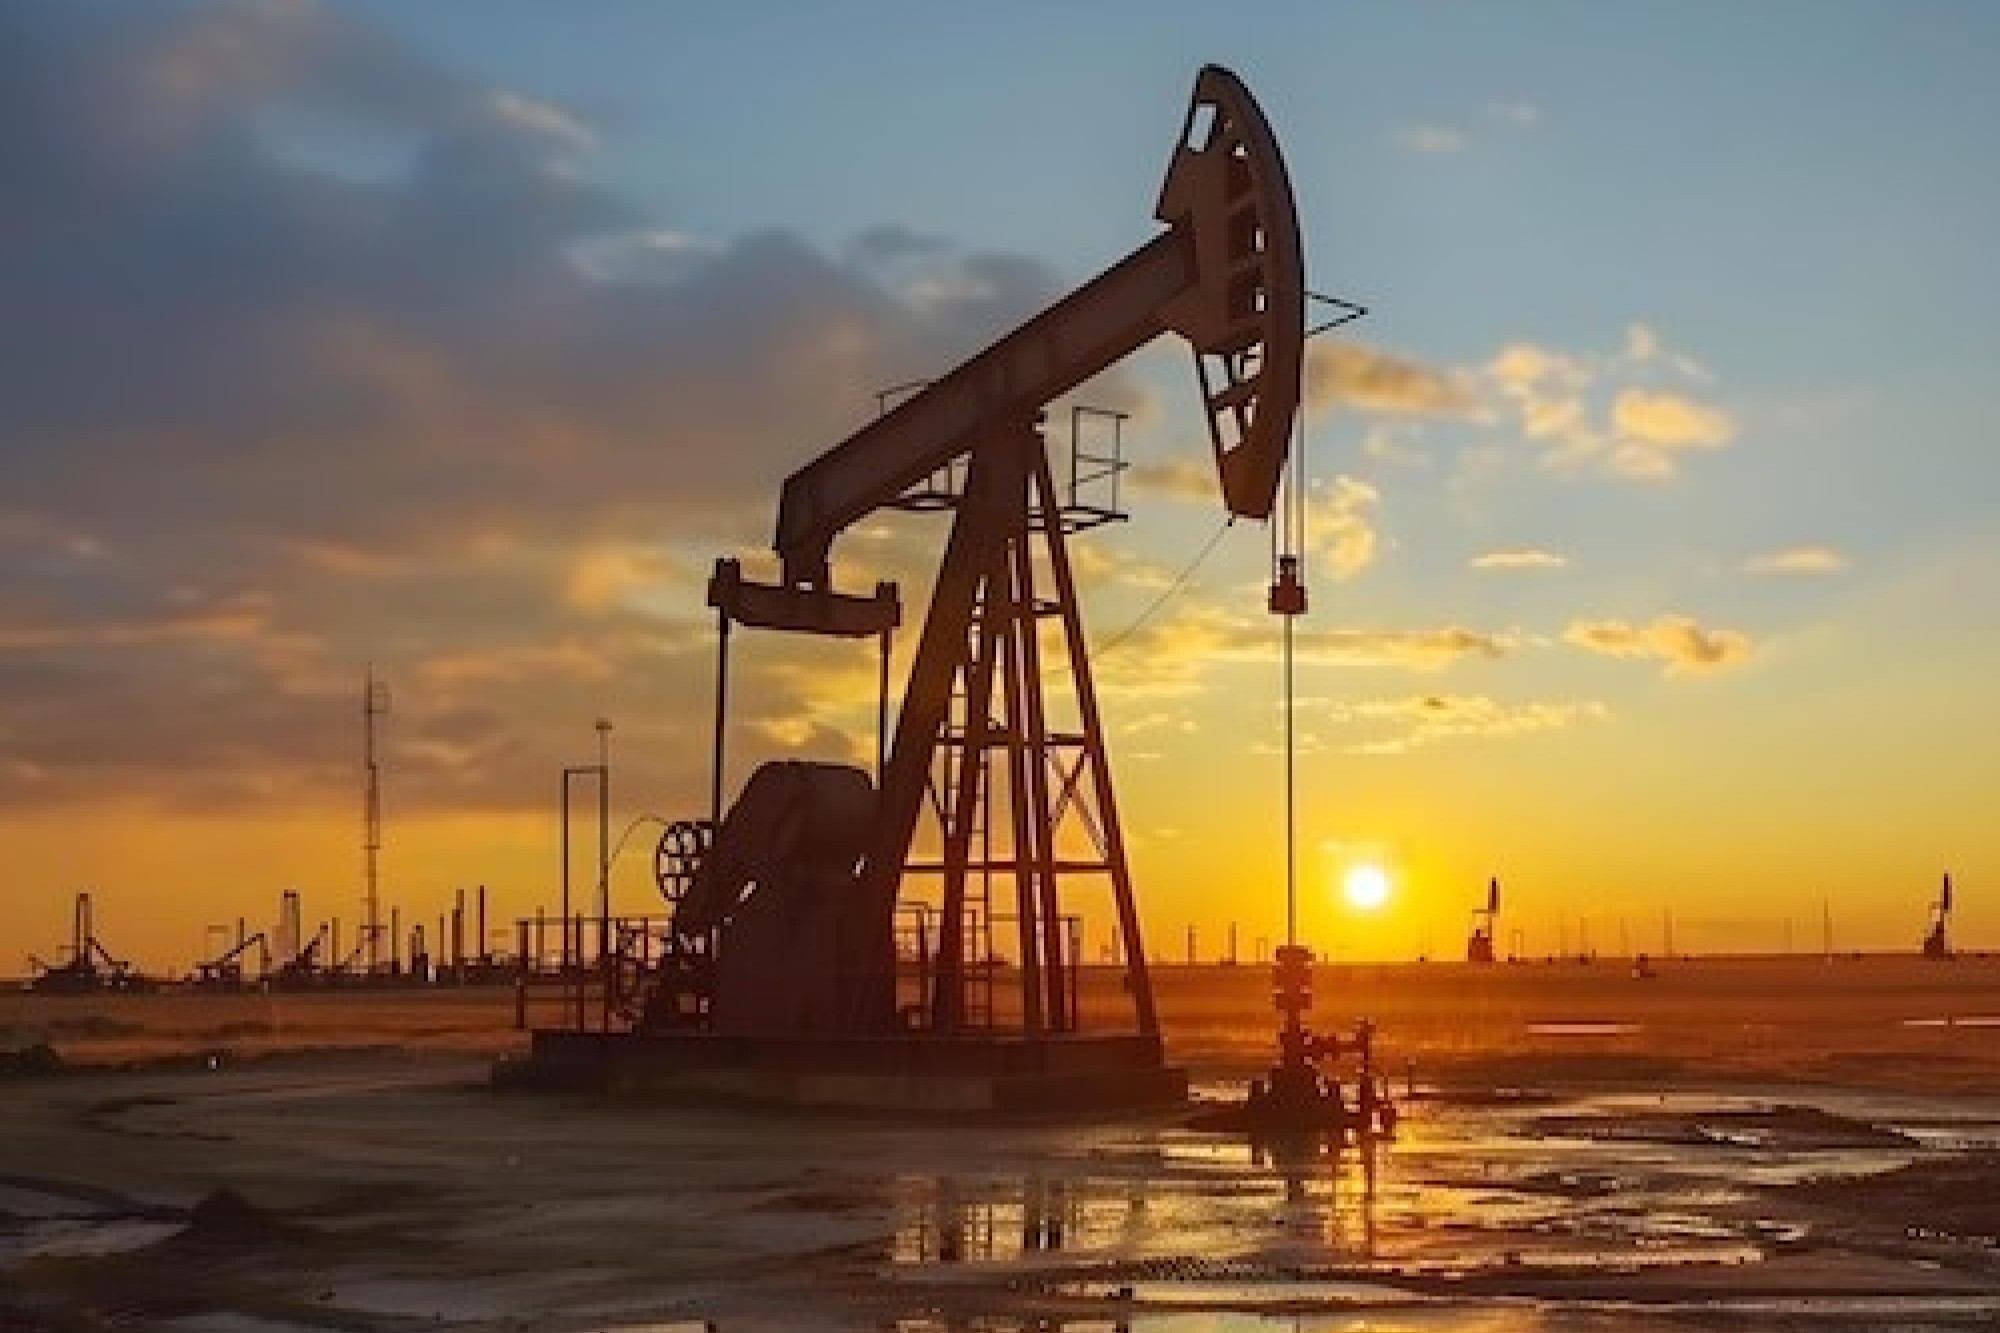 Collaboration to enable oil and gas producers in tracking emissions data